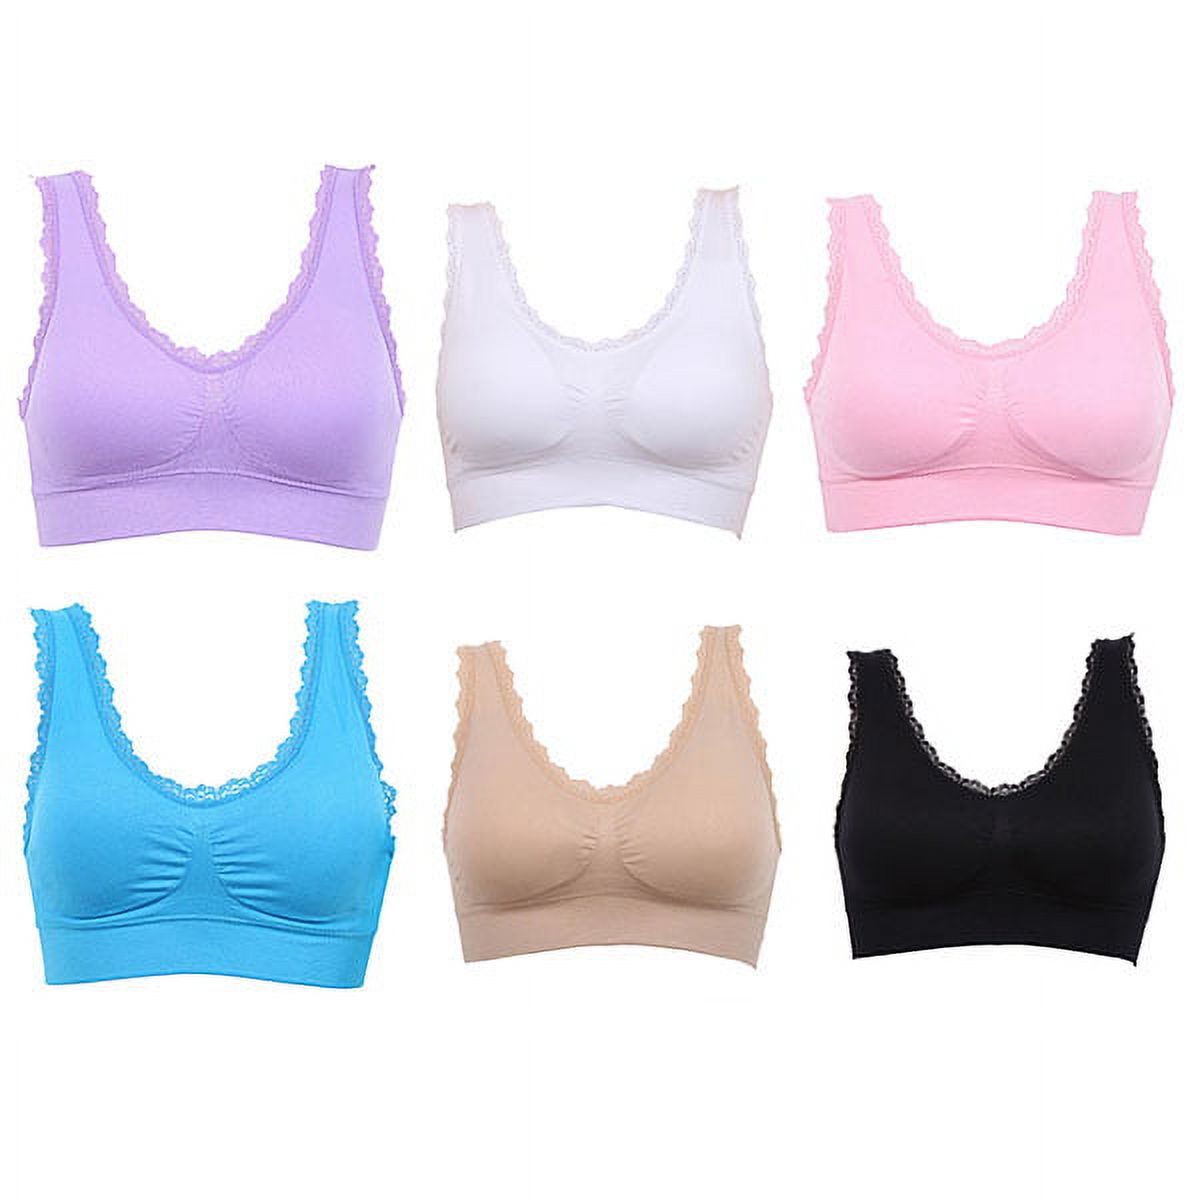 Women Sports Summer Bra Padded Bra Lace Crop Top Stretch Fitness Gym Yoga Outdoor Athletic Vest Black XL - image 2 of 11